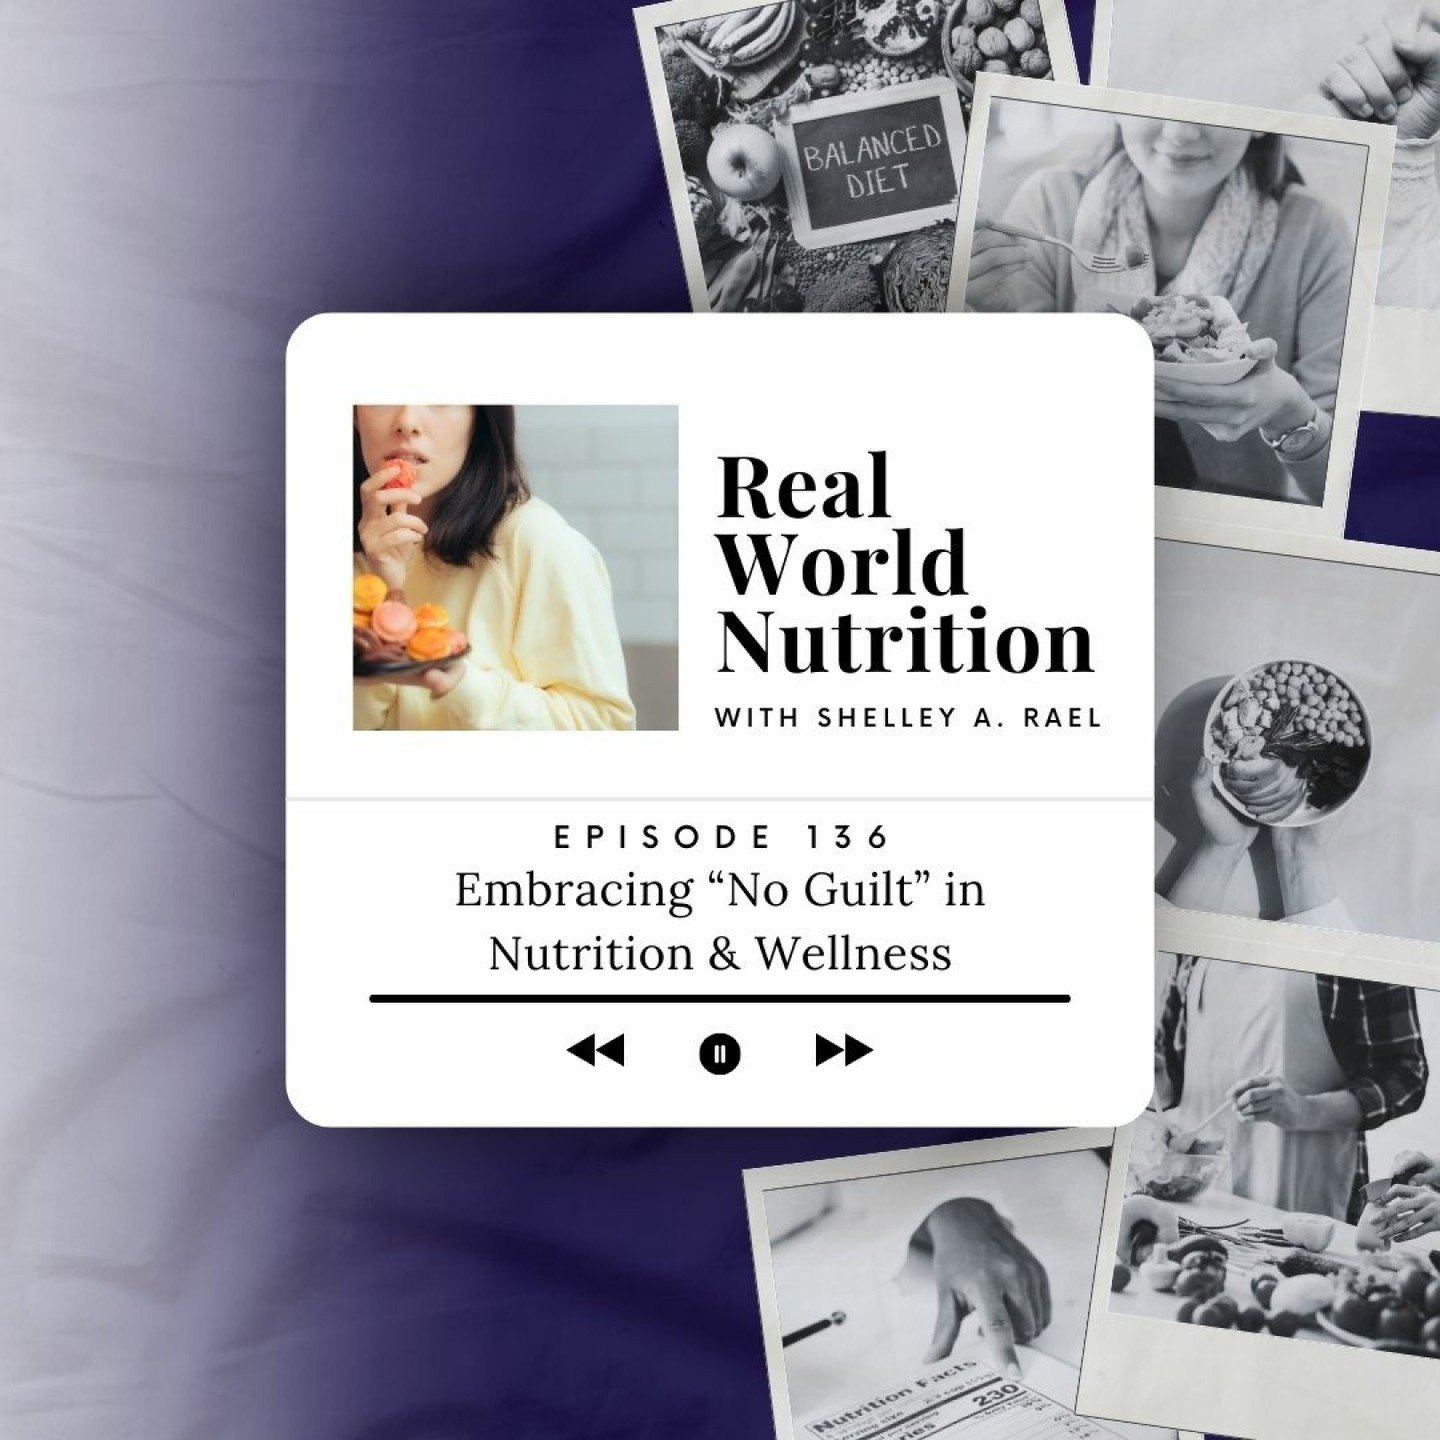 New Episode Alert! 

😔 Have you ever felt guilty about your food choices? 

🚫It's time to embrace &quot;No Guilt&quot; in nutrition and wellness! 

🧁In Episode 136 of Real World Nutrition, I discuss food freedom and share practical strategies for 